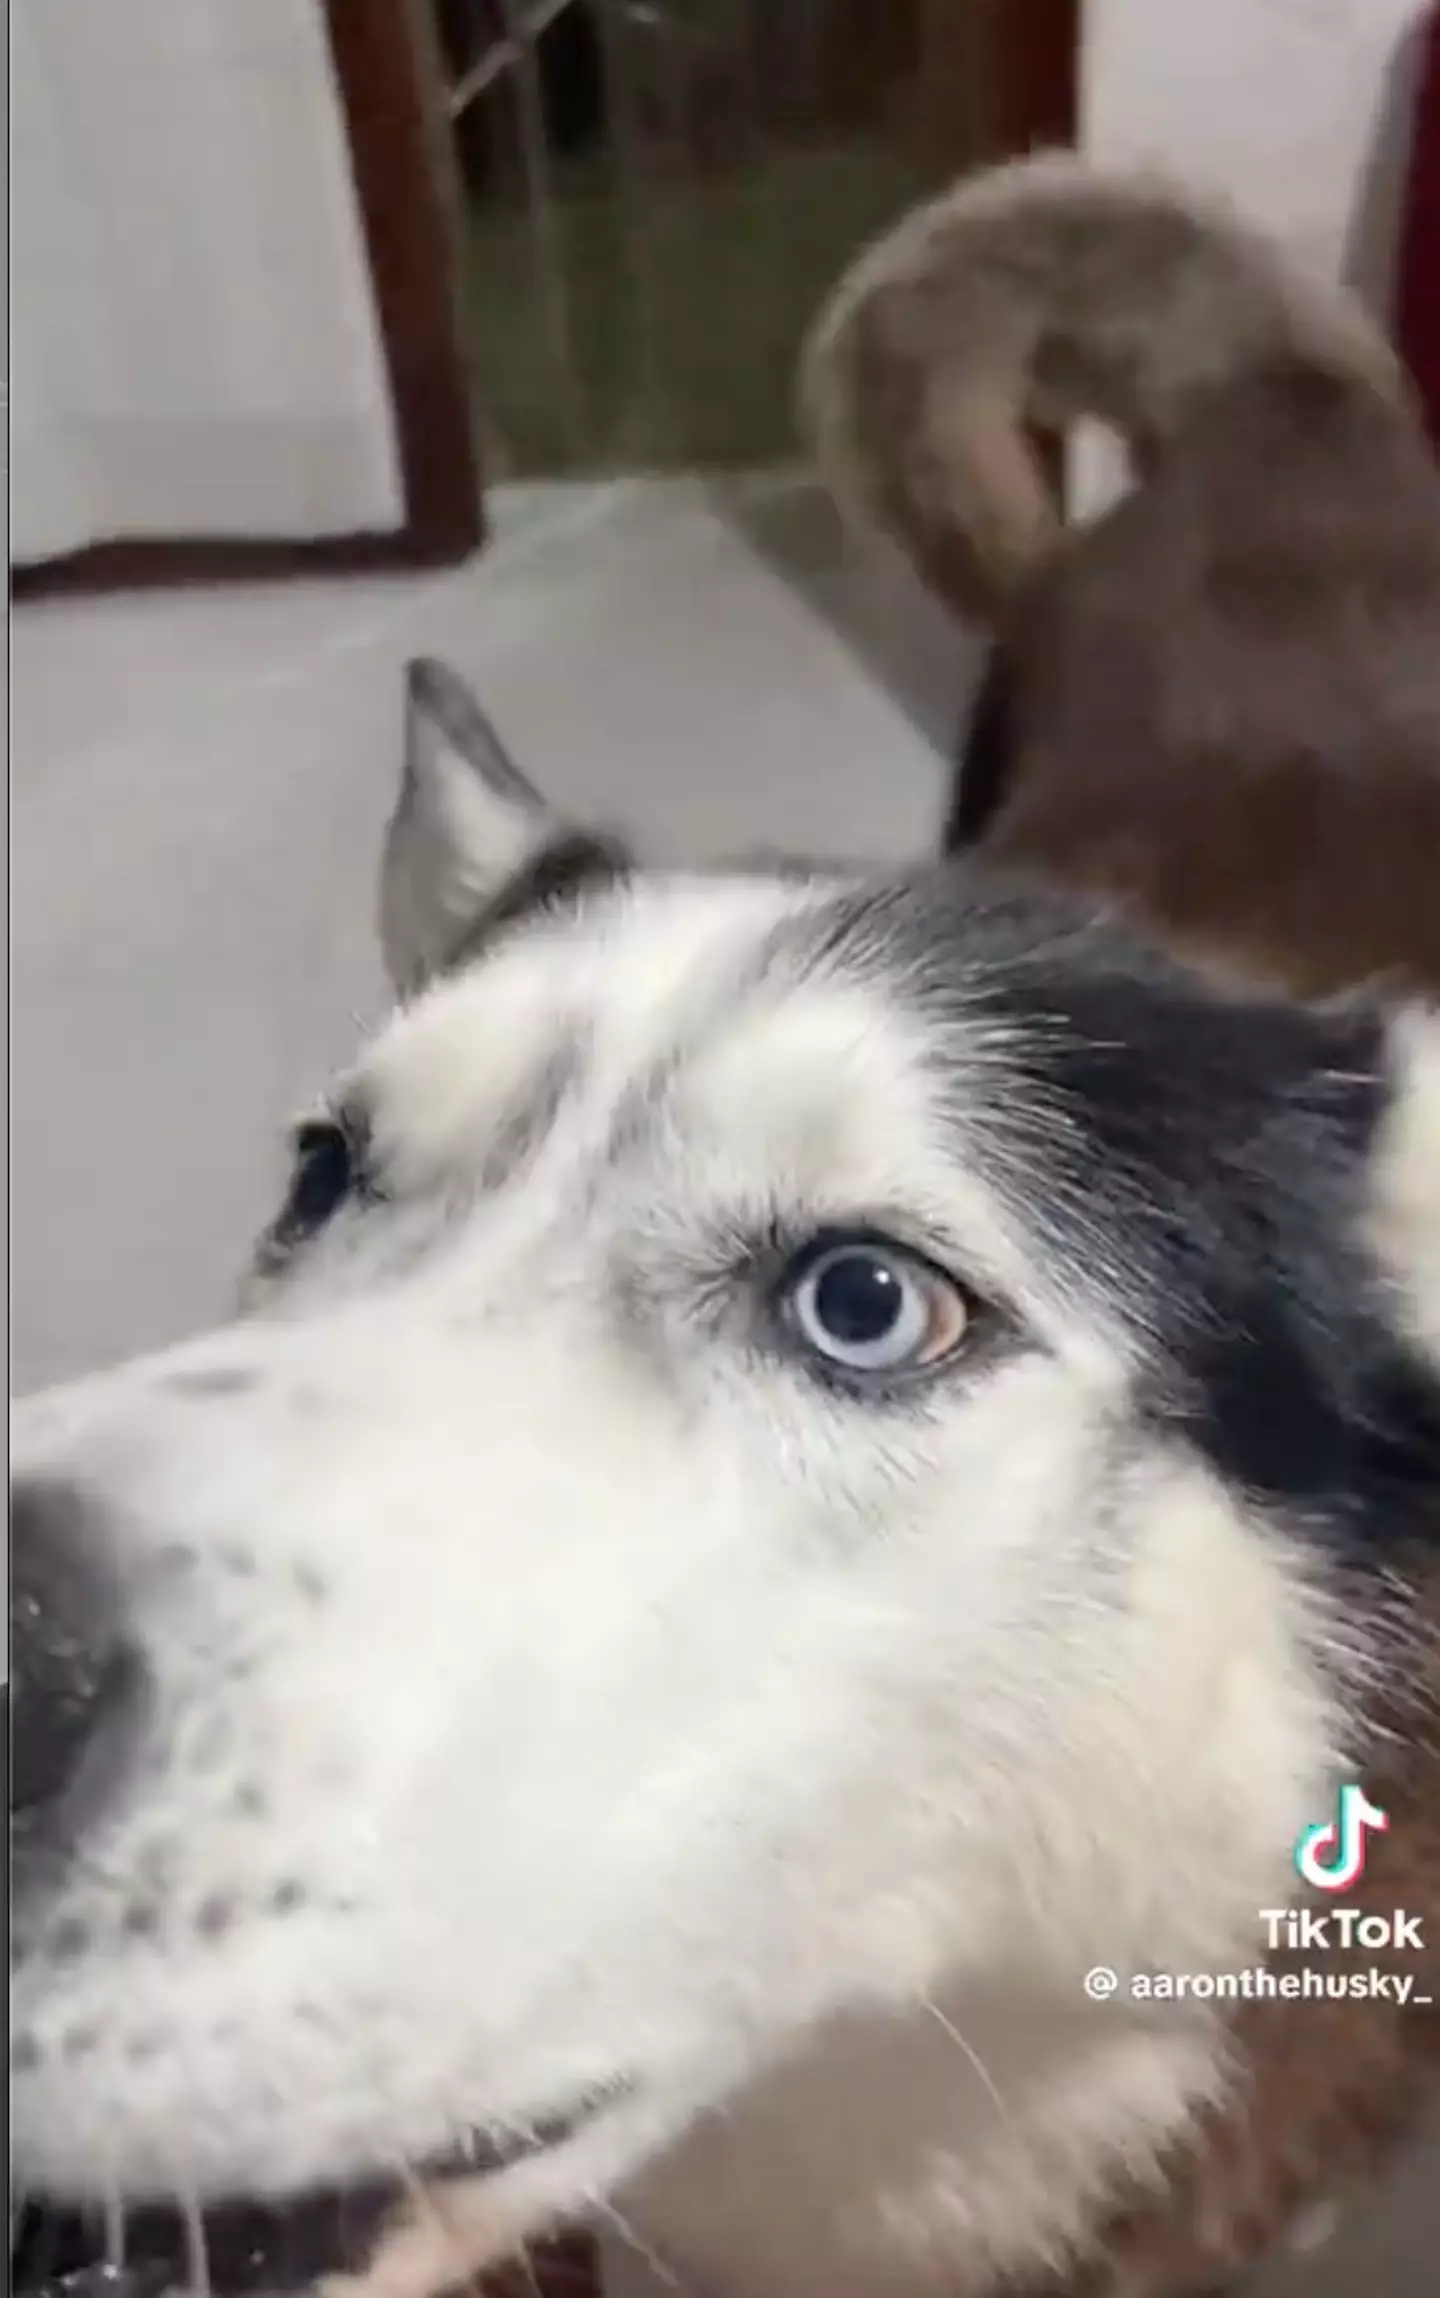 The dog has gone viral thanks to his unusual ‘voice’.